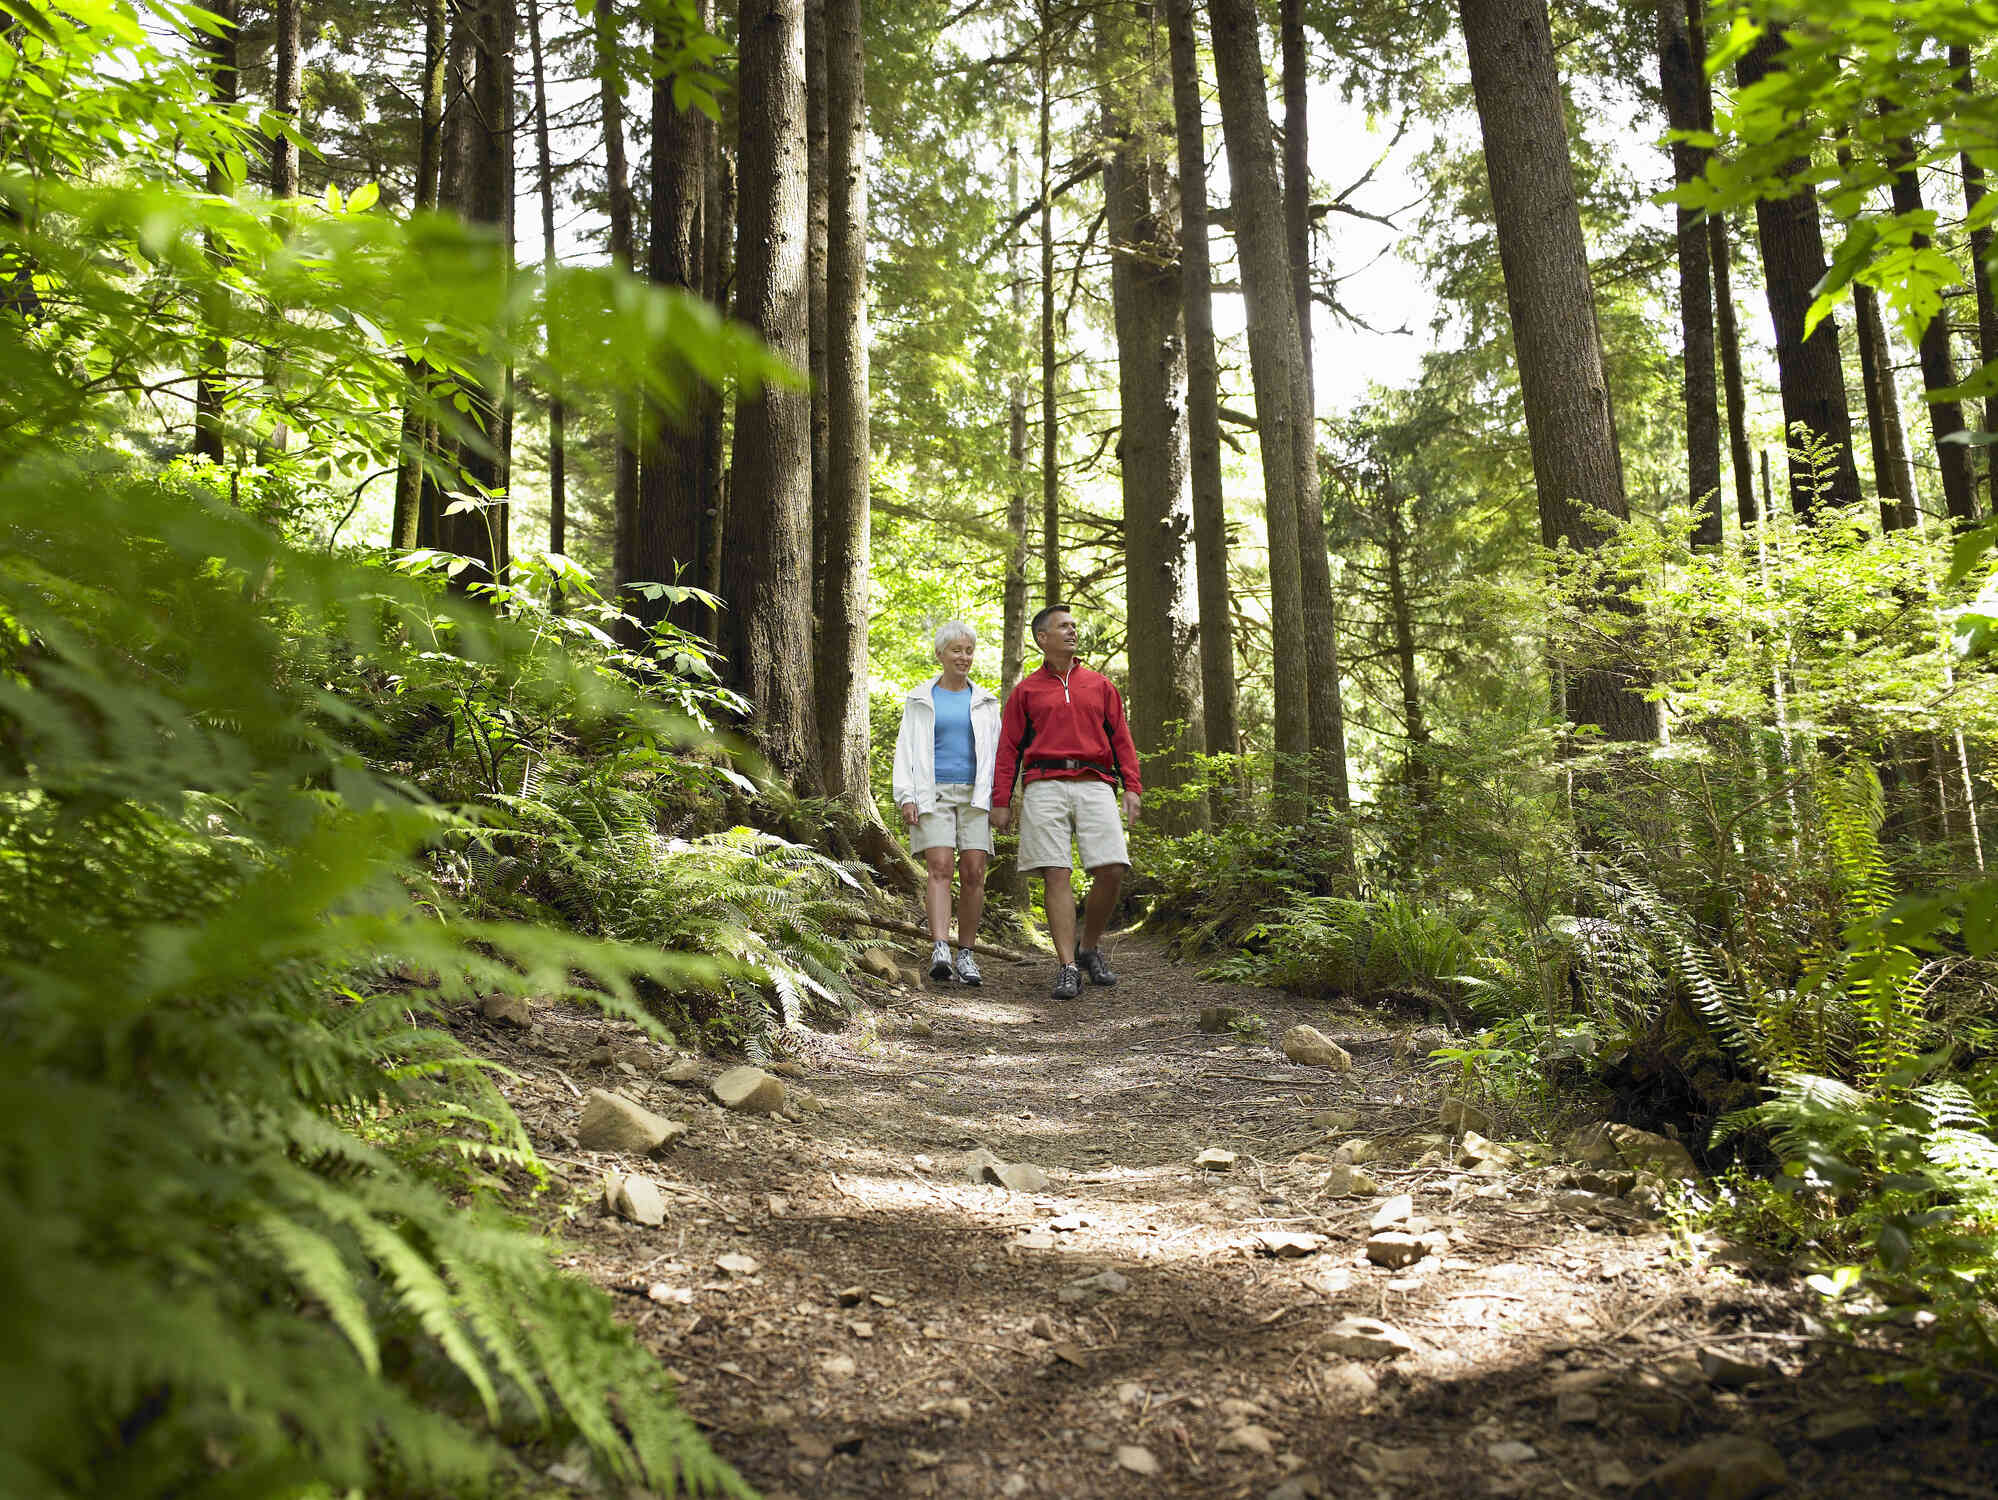 A middle aged man and woman go for a nature walk on a trail on a sunny day.